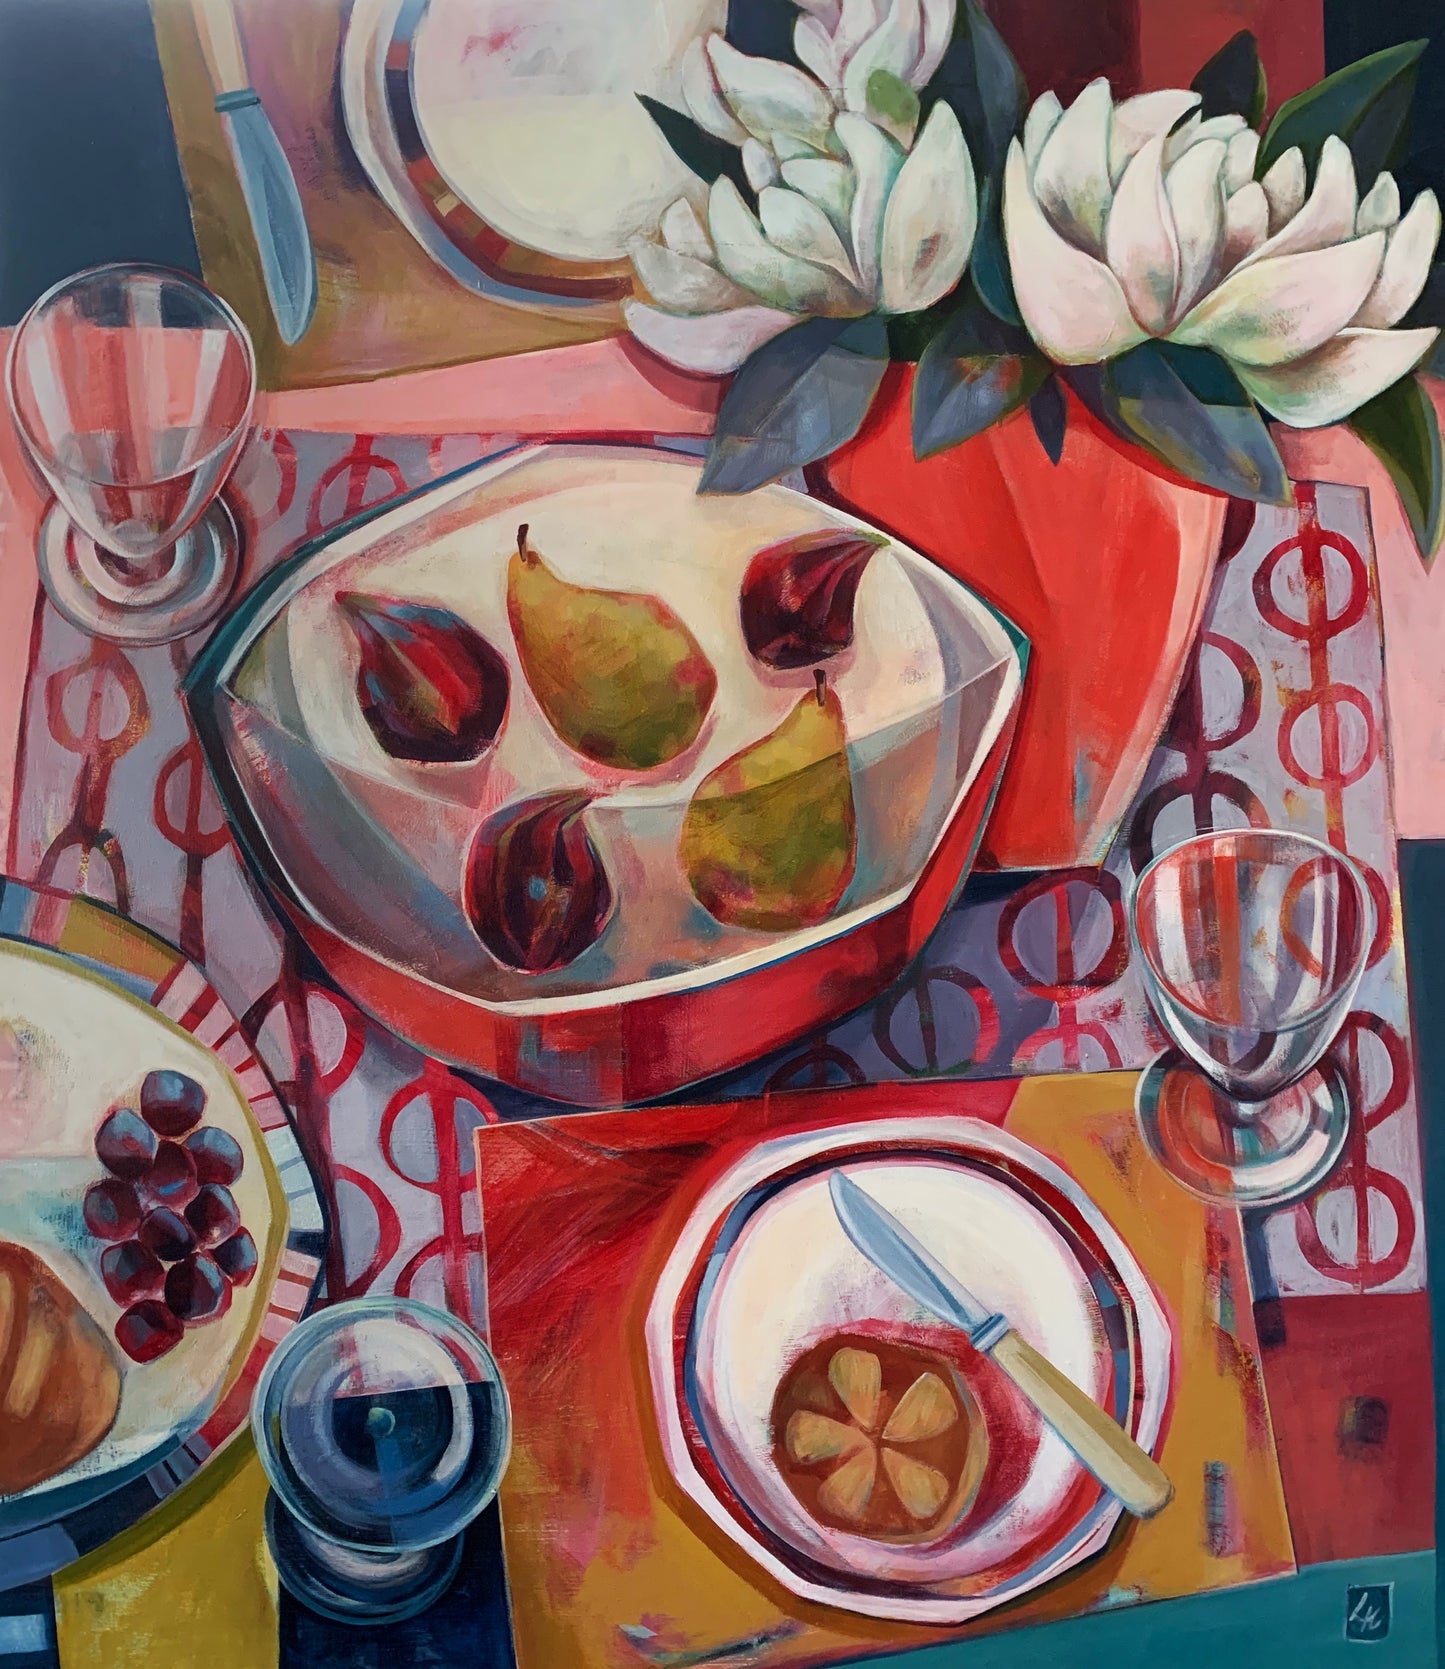 liza kavanagh original painting on board The Carnelian Vase. a contemporary still life in shades of red